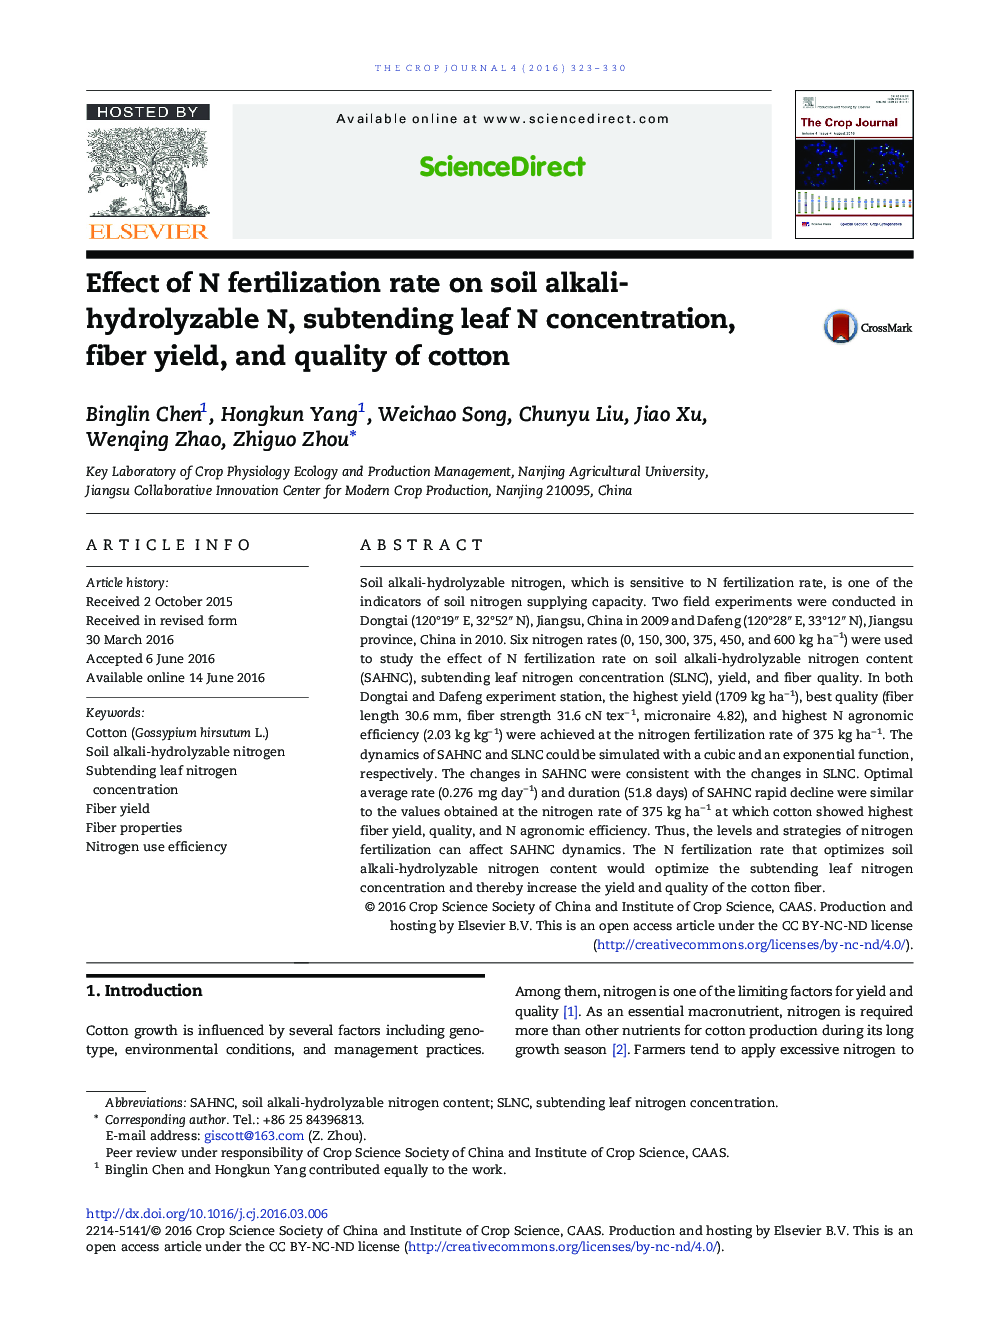 Effect of N fertilization rate on soil alkali-hydrolyzable N, subtending leaf N concentration, fiber yield, and quality of cotton